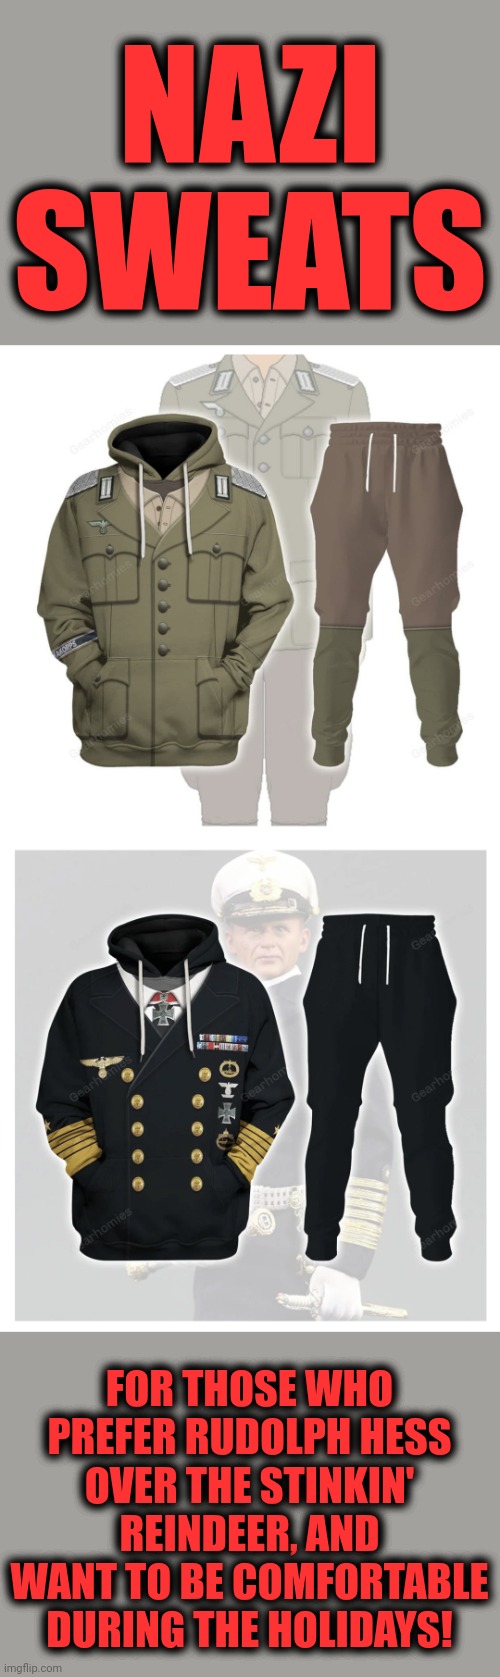 Wait, what?! |  NAZI SWEATS; FOR THOSE WHO PREFER RUDOLPH HESS OVER THE STINKIN' REINDEER, AND WANT TO BE COMFORTABLE DURING THE HOLIDAYS! | image tagged in memes,nazi sweats,rudolph | made w/ Imgflip meme maker